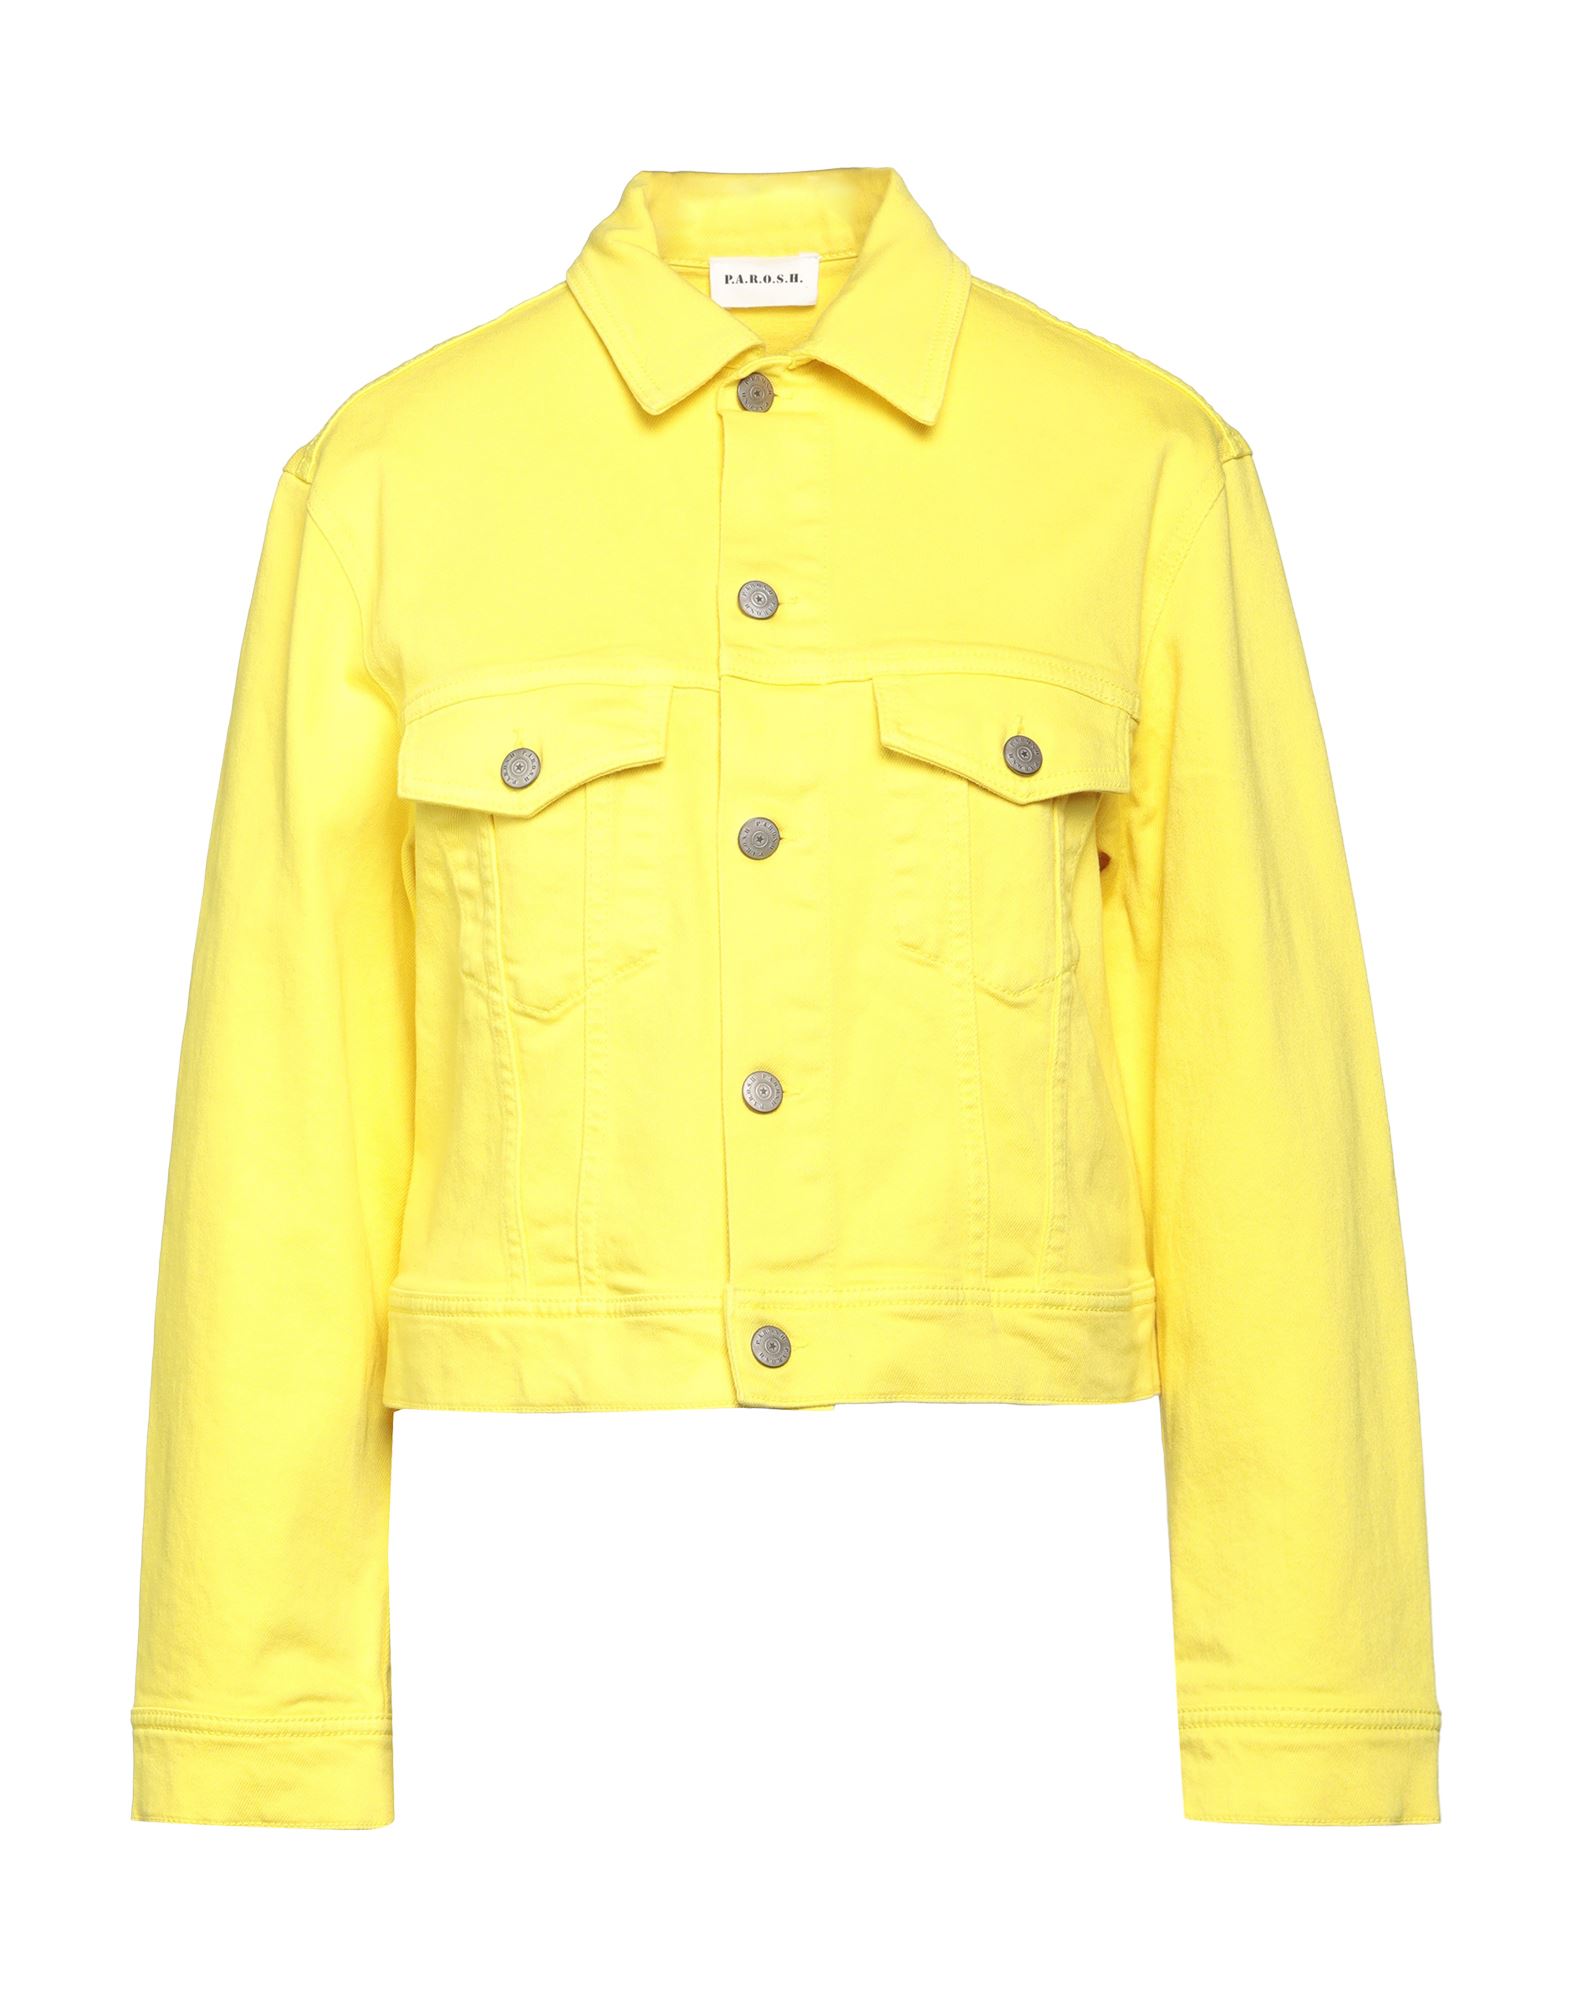 P.a.r.o.s.h Denim Outerwear In Yellow